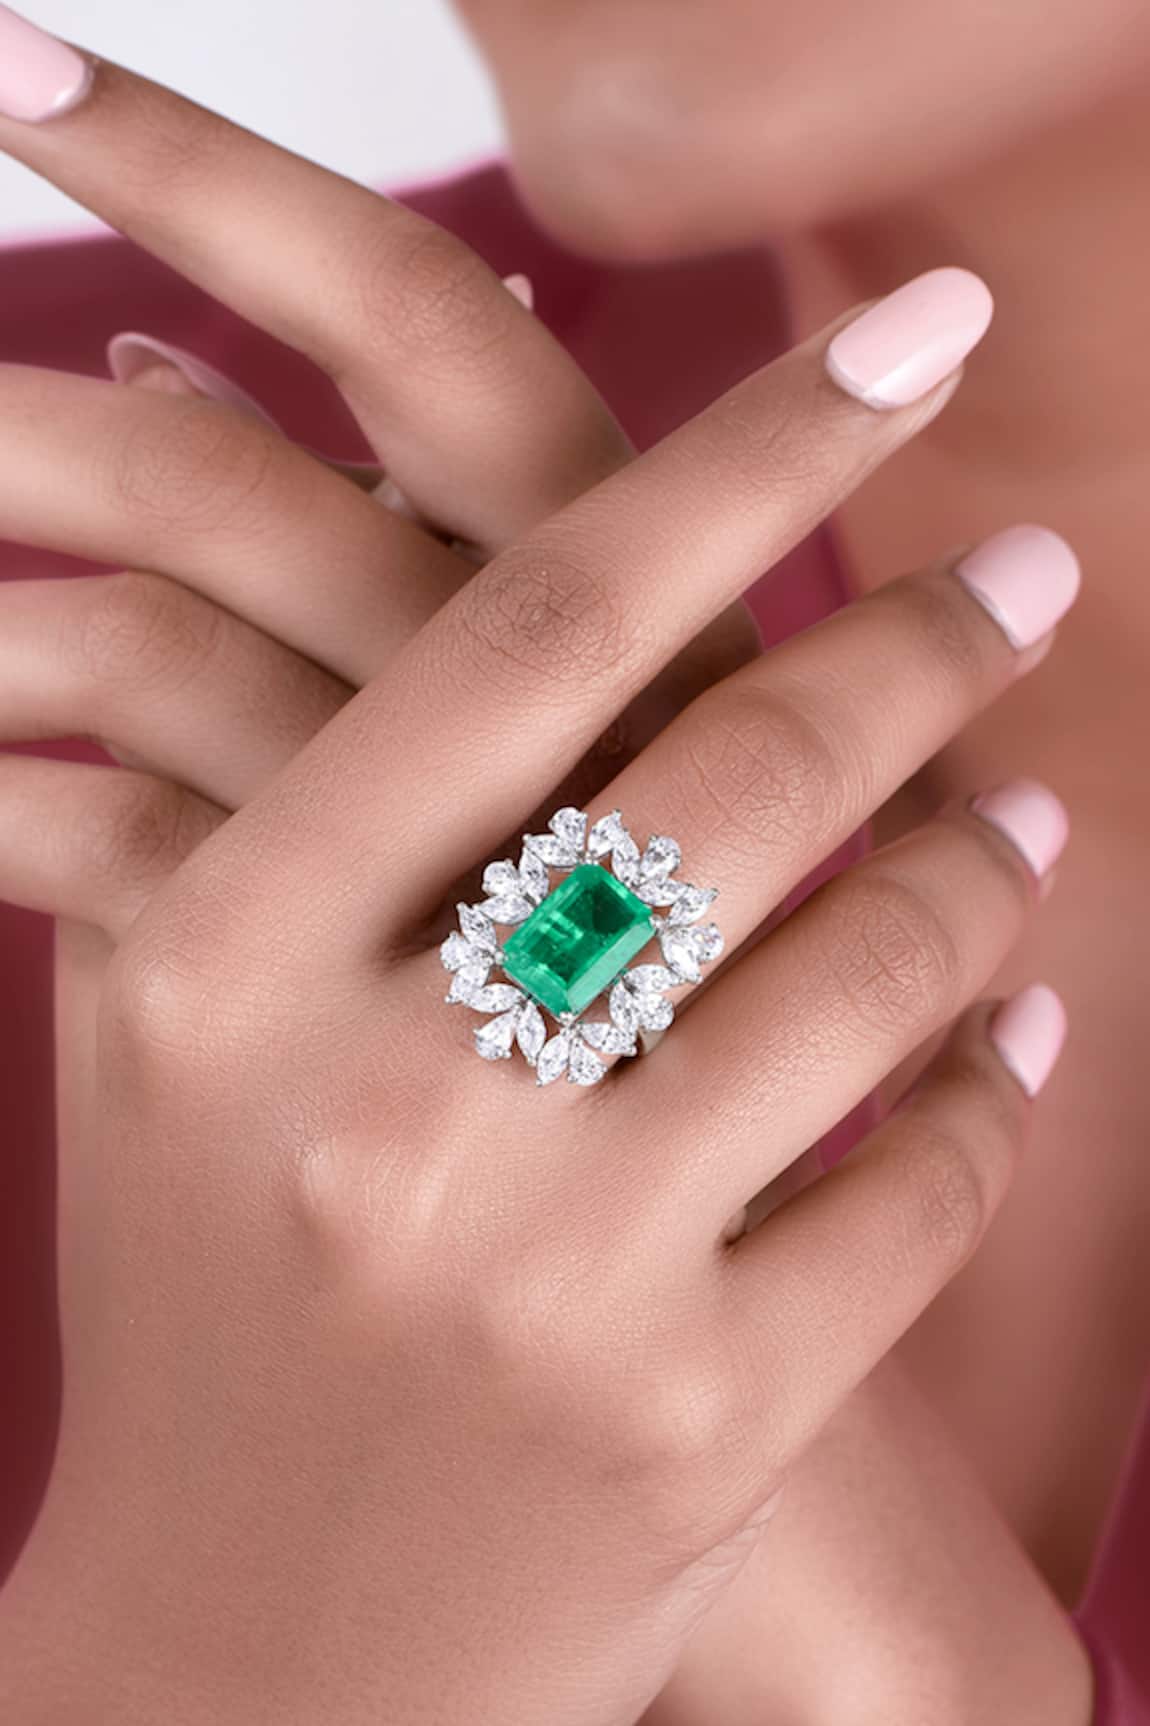 DIOSA PARIS JEWELLERY Octogen Shaped Man-Made Emerald Embellished Ring